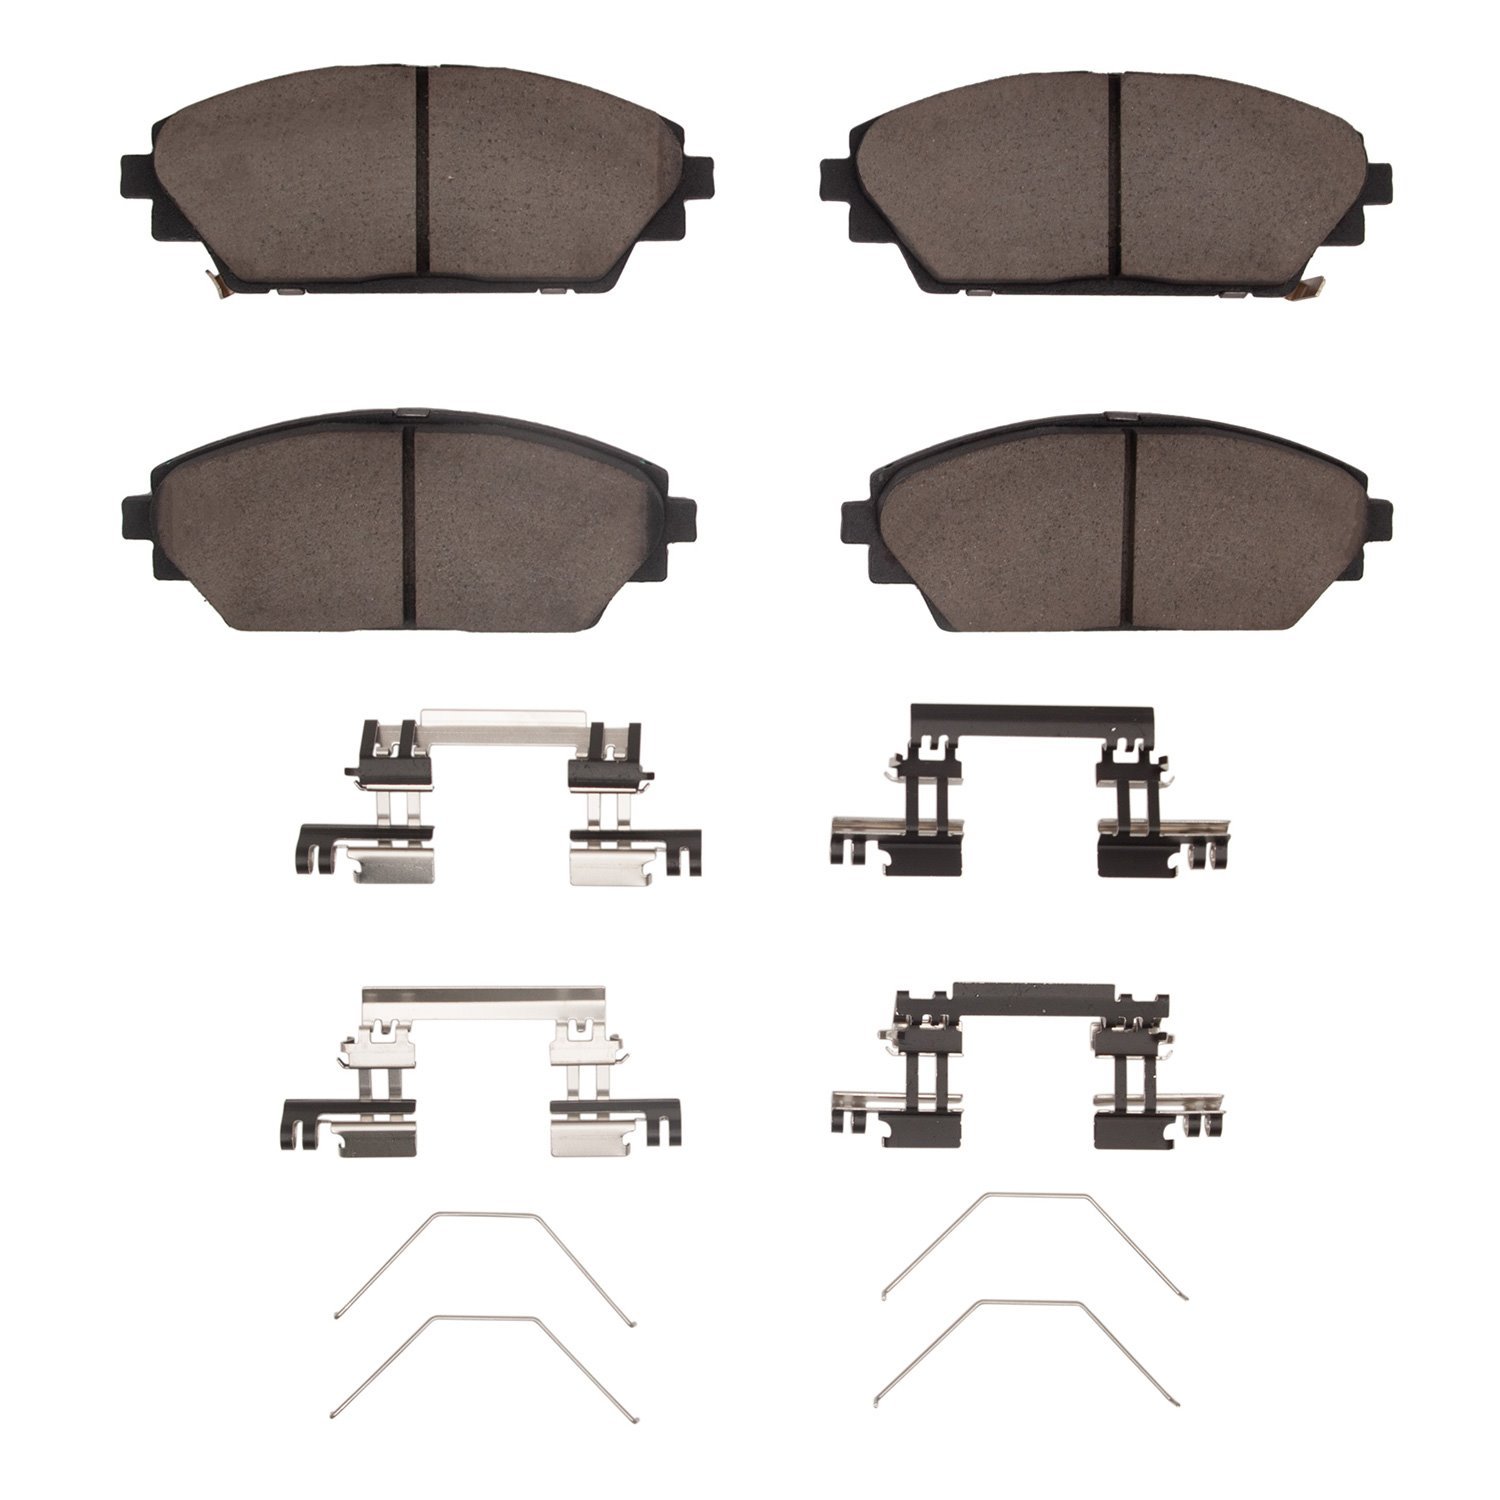 1310-2275-01 3000-Series Ceramic Brake Pads & Hardware Kit, Fits Select Ford/Lincoln/Mercury/Mazda, Position: Front